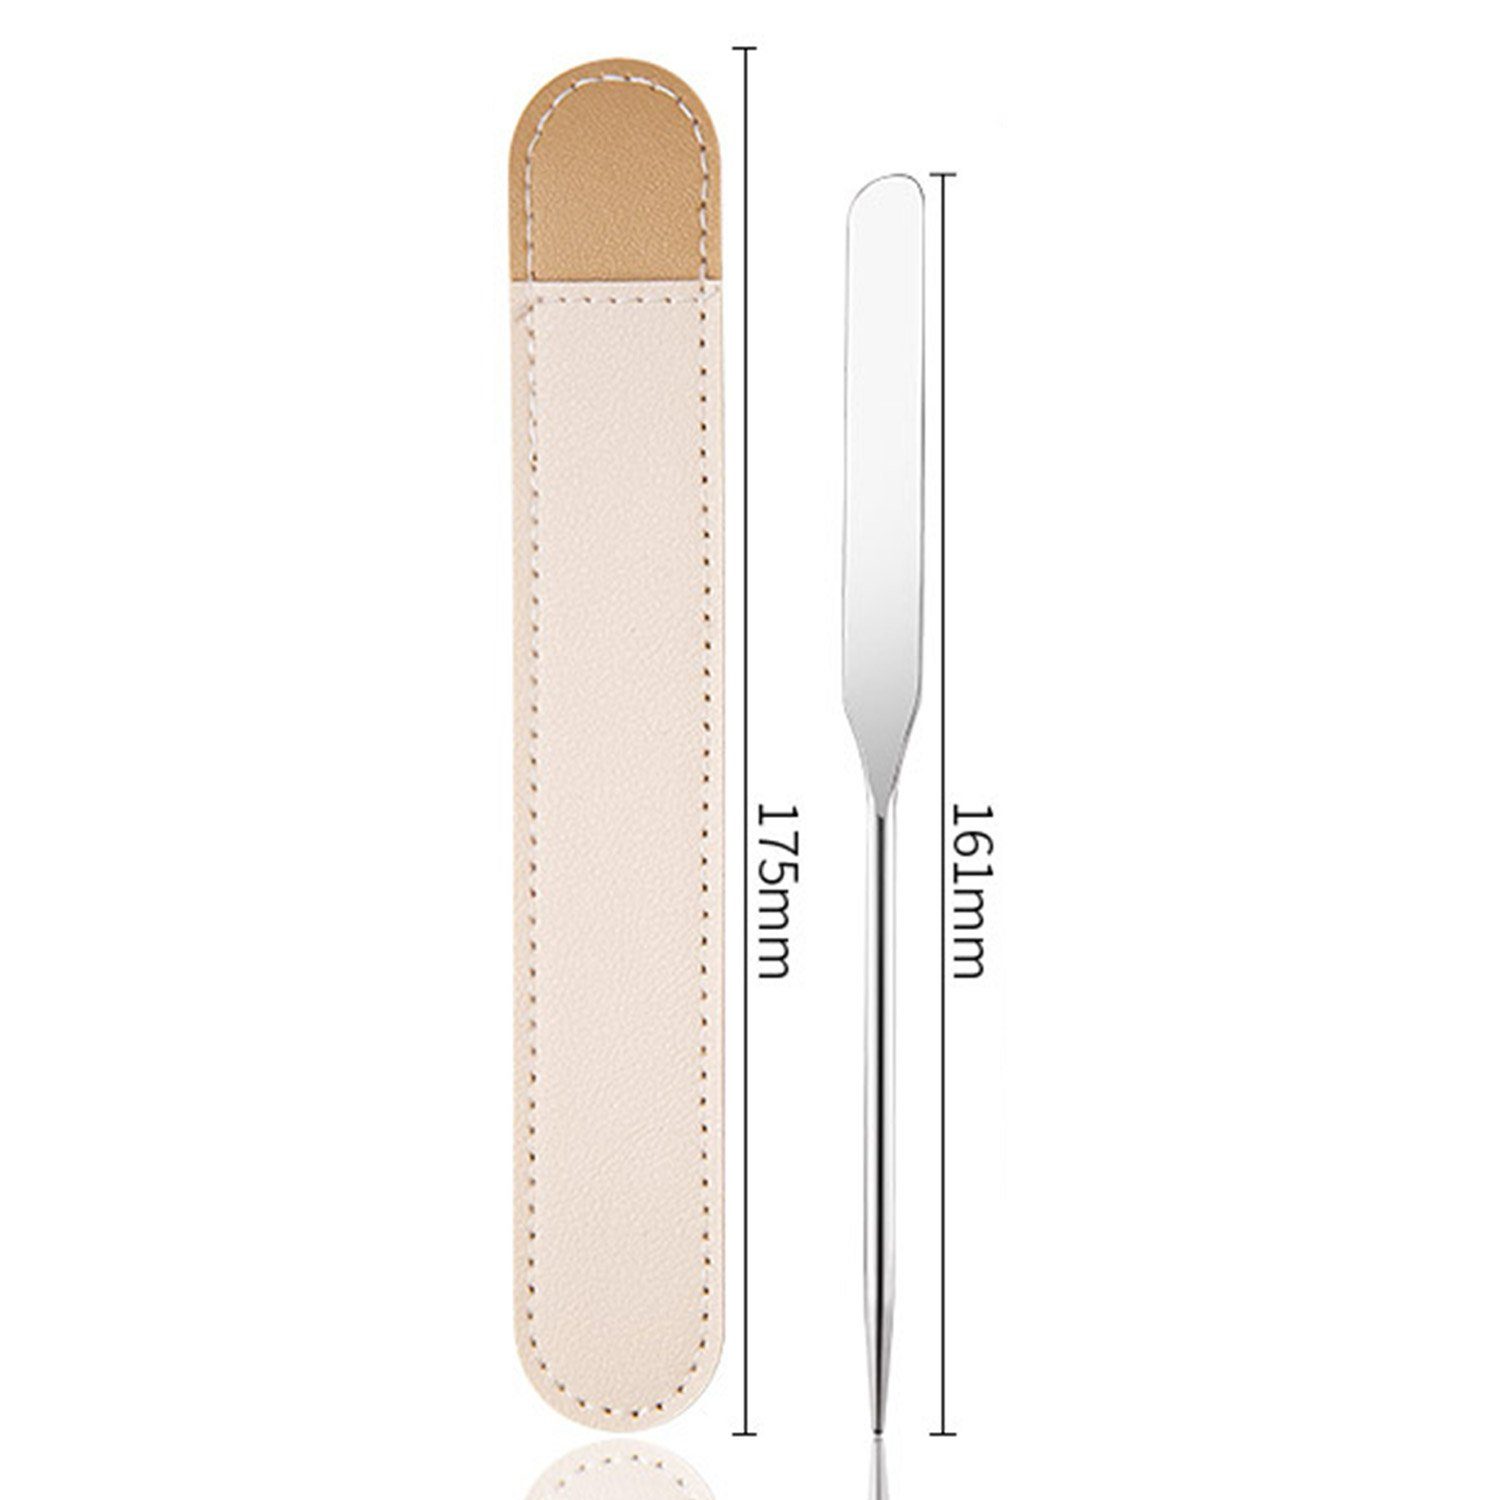 Tools Schwamm Make-up 2-teiliges MAGICSHE Professionelle Pinsel,Palettenstab, Set & Make-up-Tools Beauty